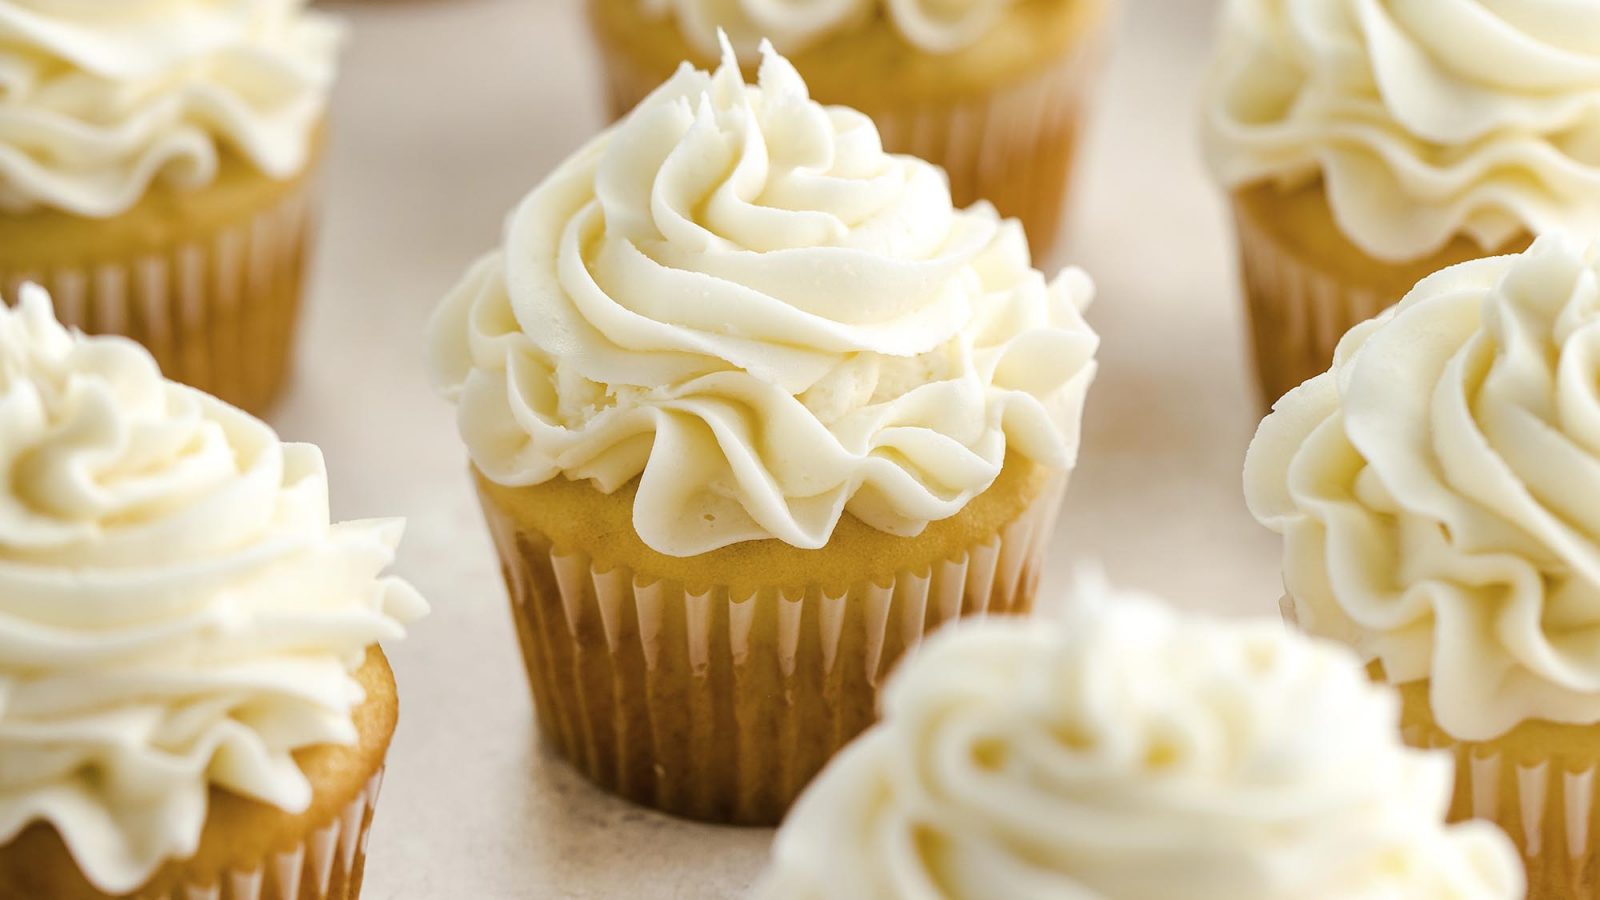 🍝 Say “Yay” Or “Nay” to These Comfort Foods, And We’ll Reveal What Type of Soul You Have Vanilla frosted cupcakes